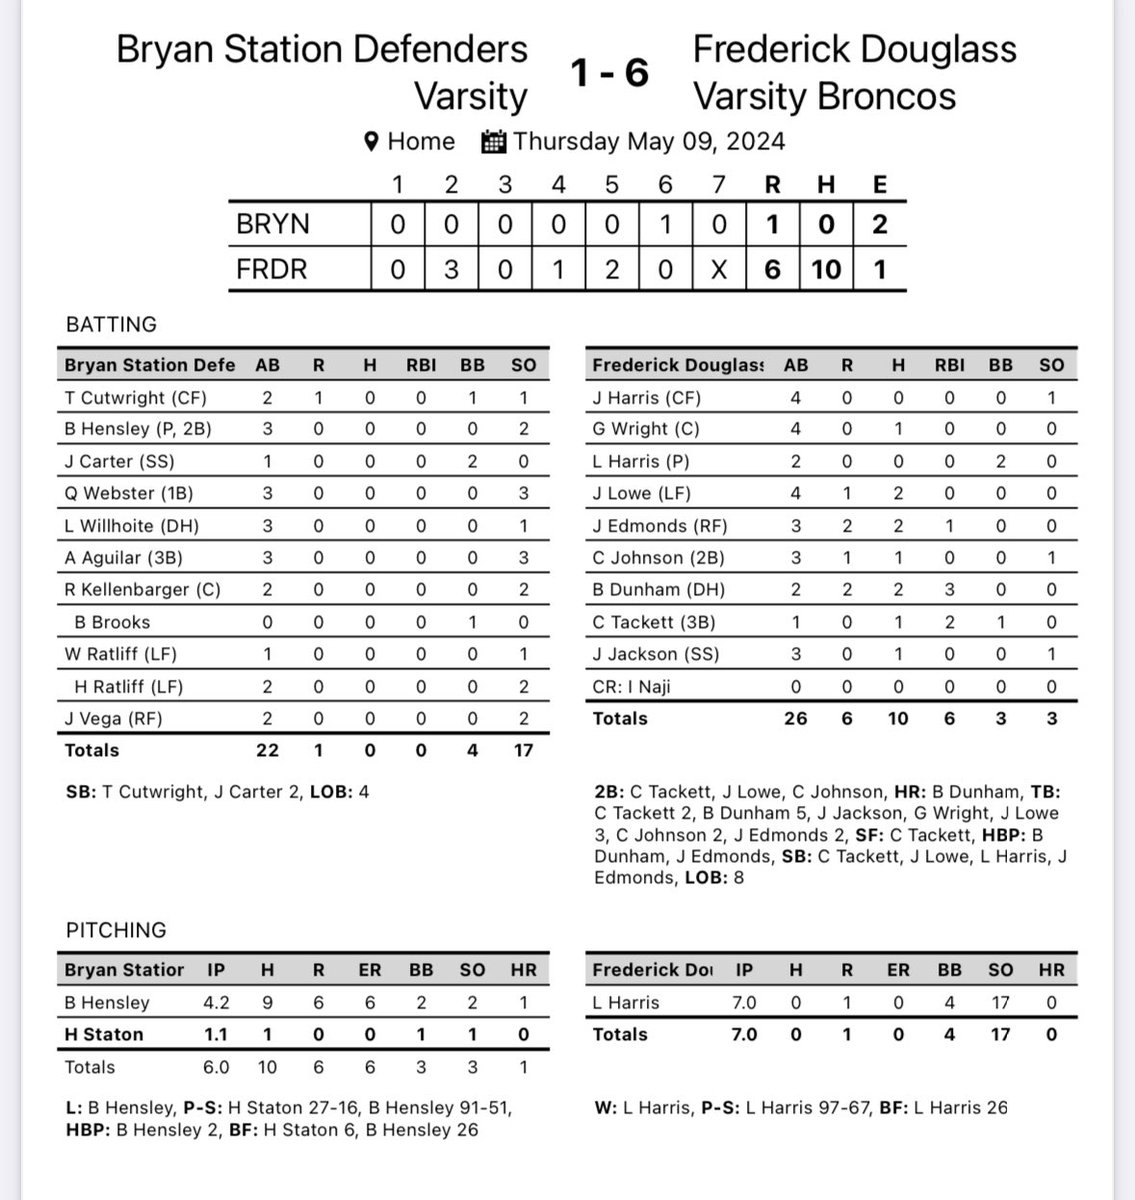 🚨🚨🚨Box Score🚨🚨🚨

Bryan Station: 1
Broncos🐎: 6

Congratulations to @LCHarris7805 for throwing a No-Hitter tonight! That makes back-to-back games that Bronco Pitchers have thrown No-Hitters!!! #stampede 

@HLpreps @PrepbaseballKY @PPL_Lex